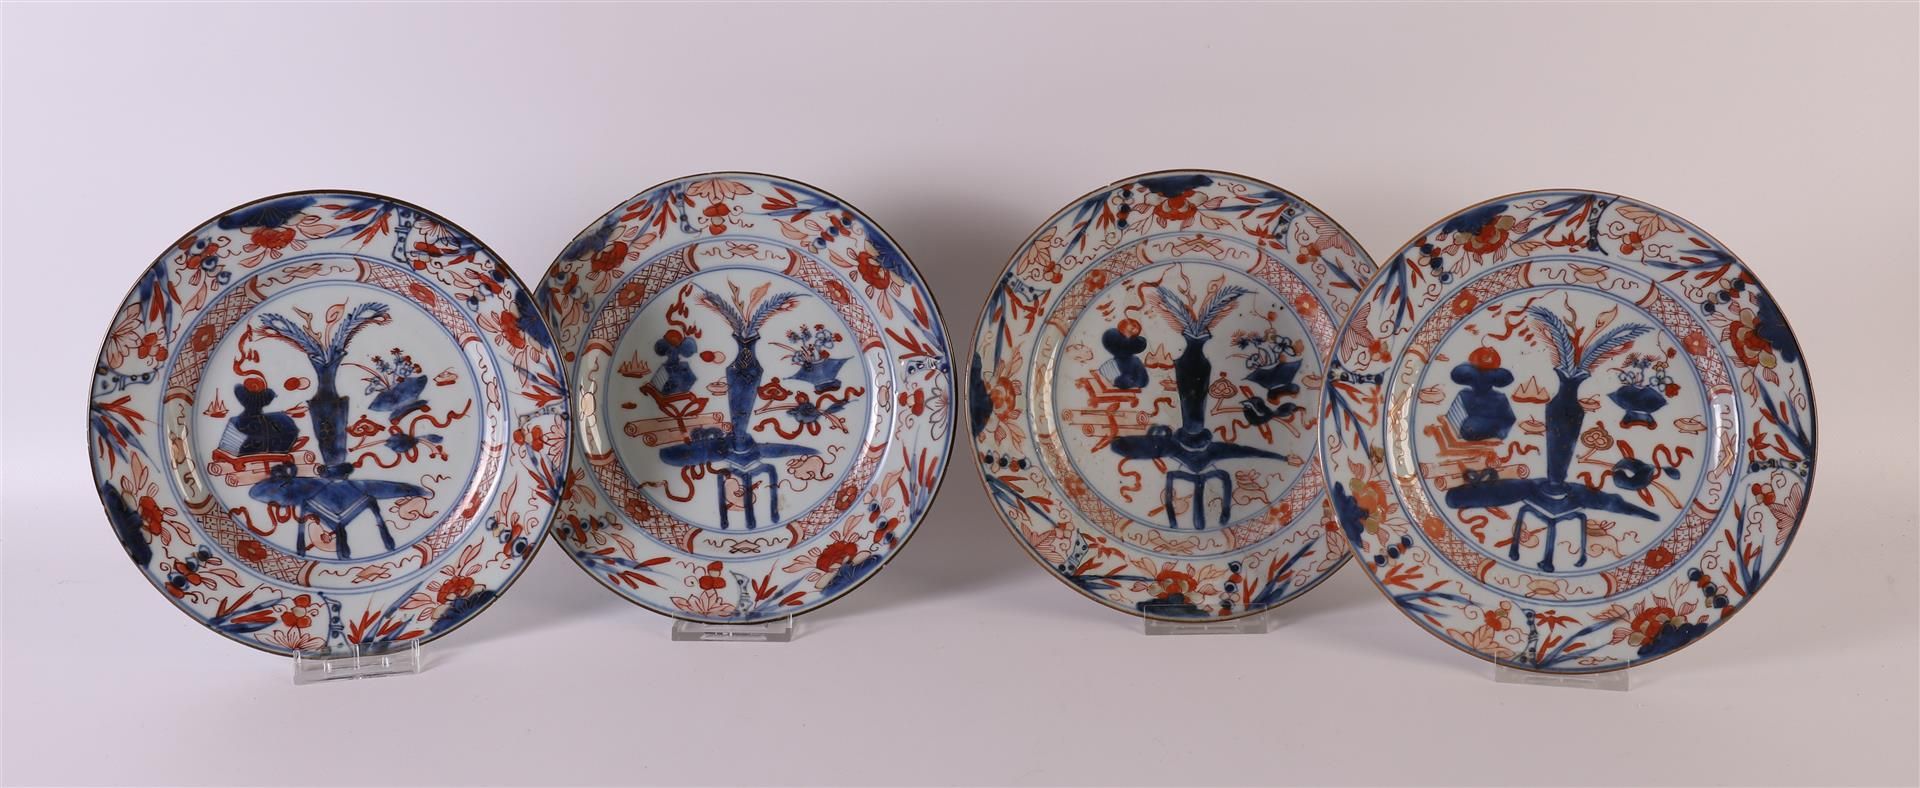 A series of four porcelain Chinese Imari plates, China, Kangxi, around 1700. Blue/red, partly gold